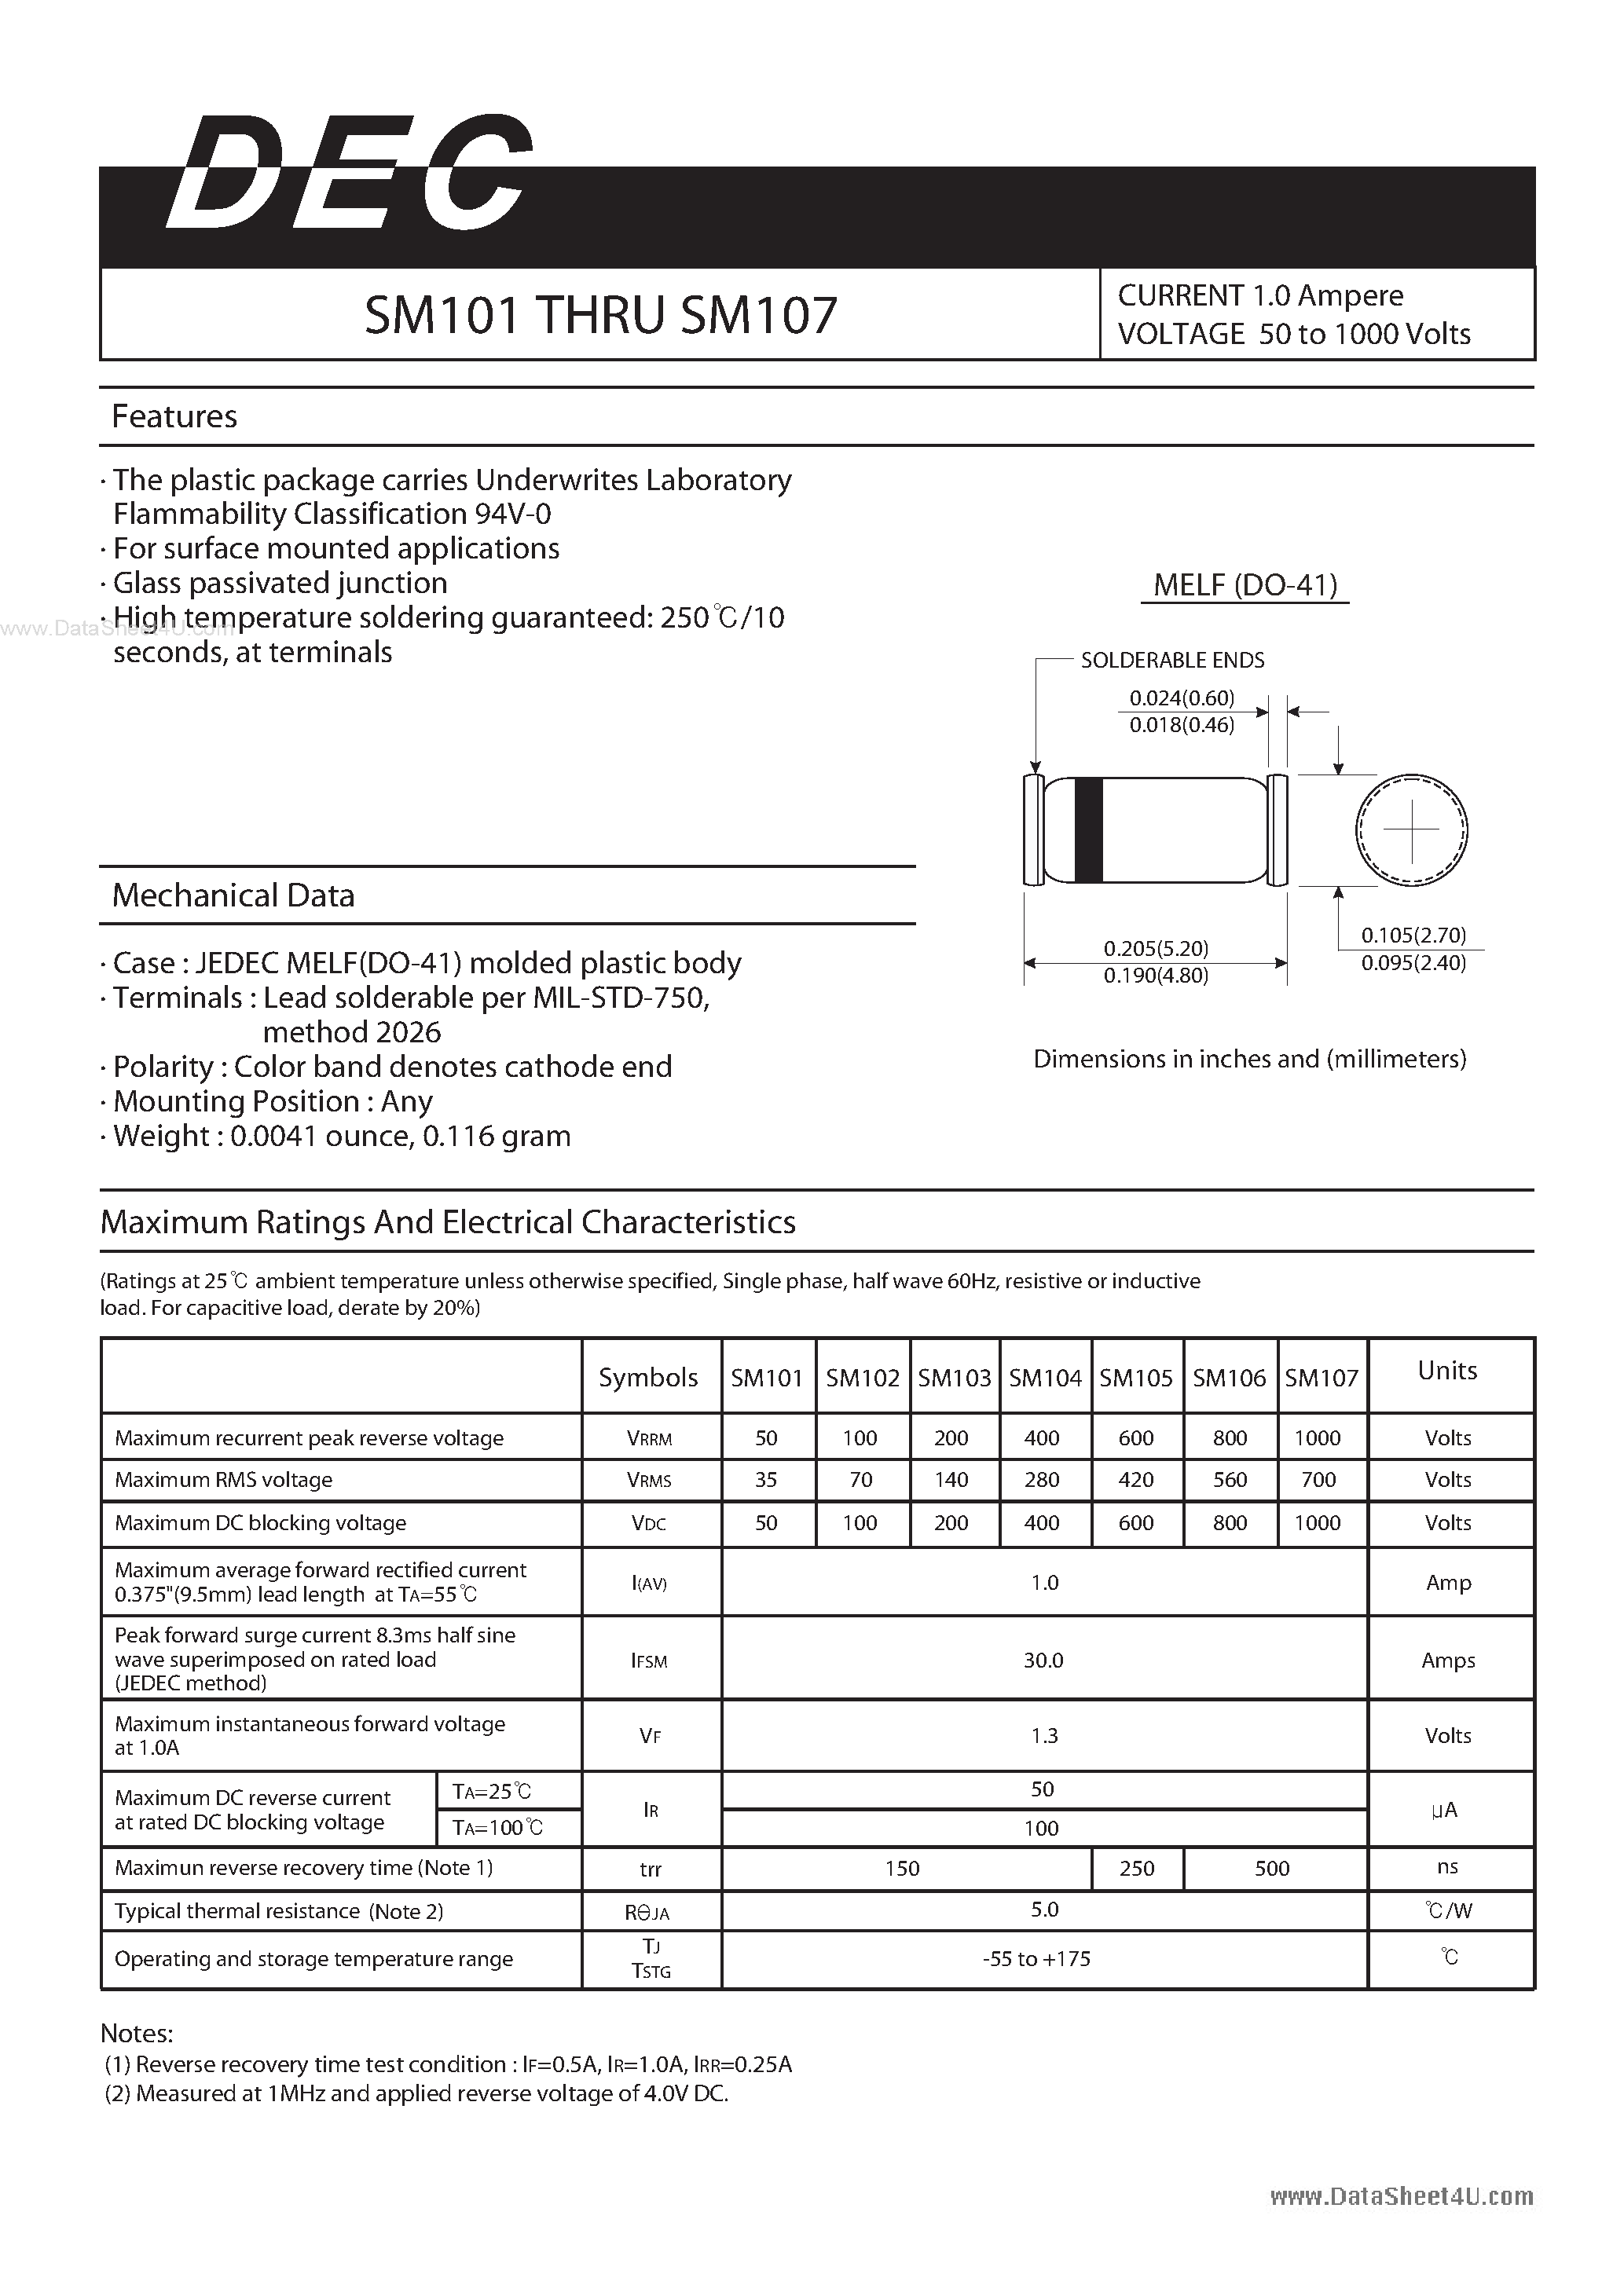 Datasheet SM101 - (SM101 - SM107) CURRENT 1.0 AMPERES VOLTAGE 50 TO 1000 VOLTS page 1